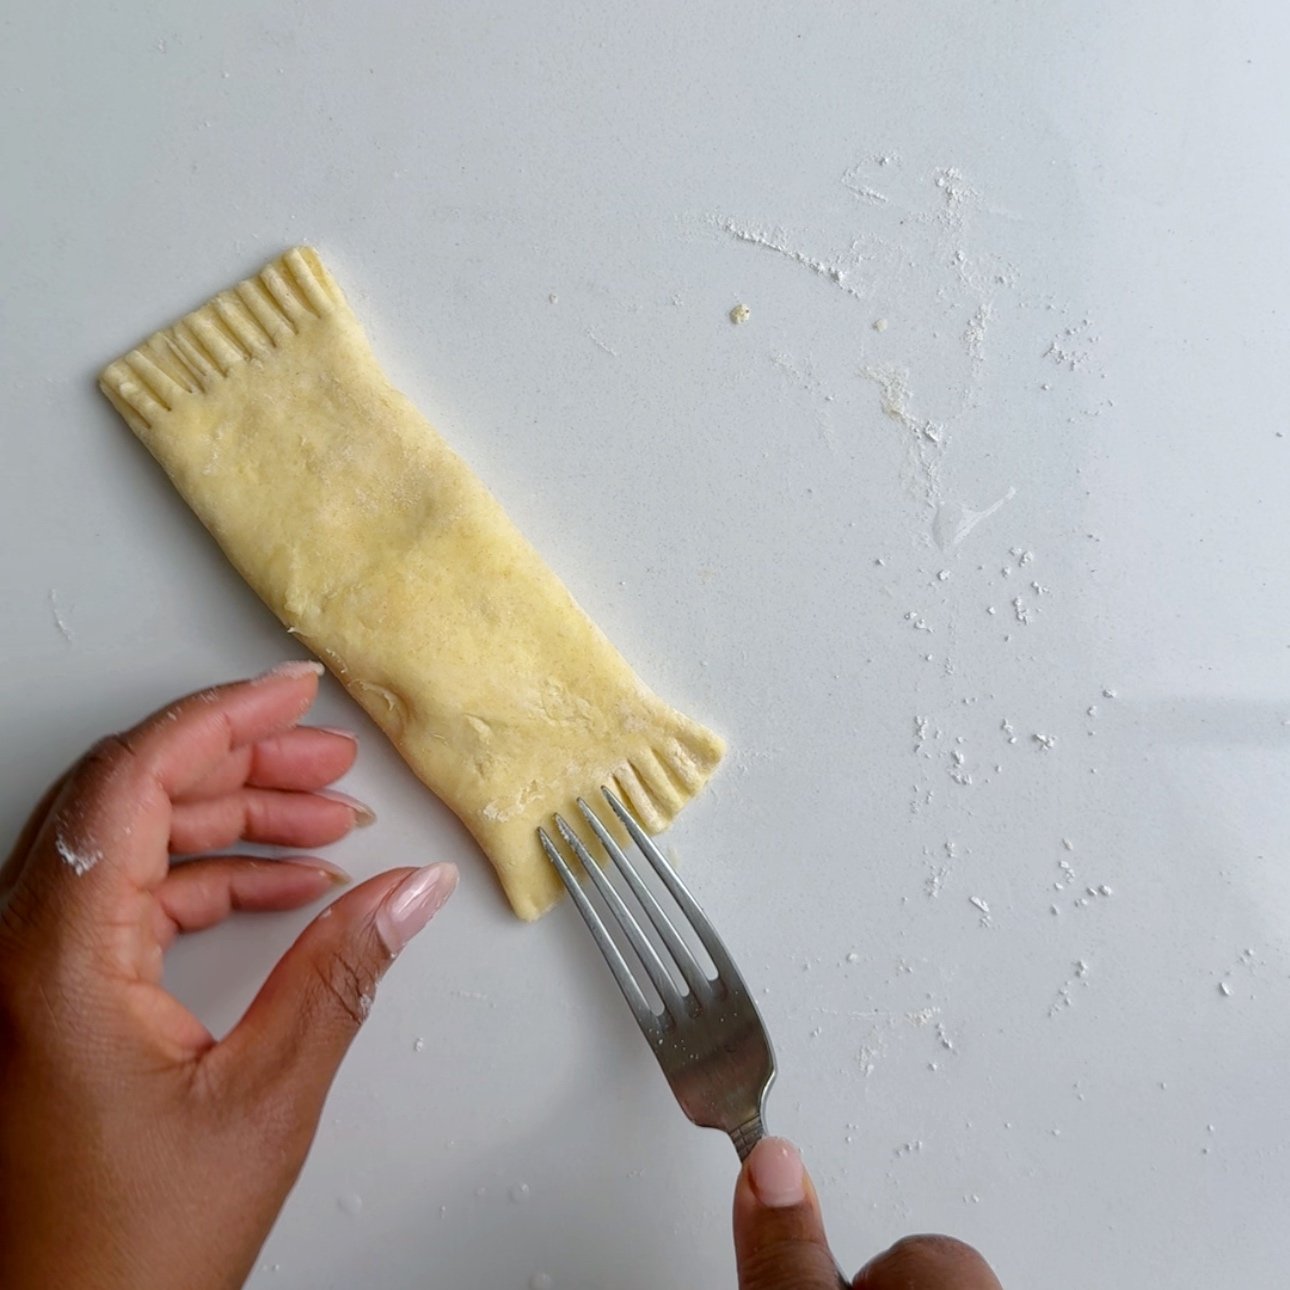 crimping the edge of the cheese rolls with a fork